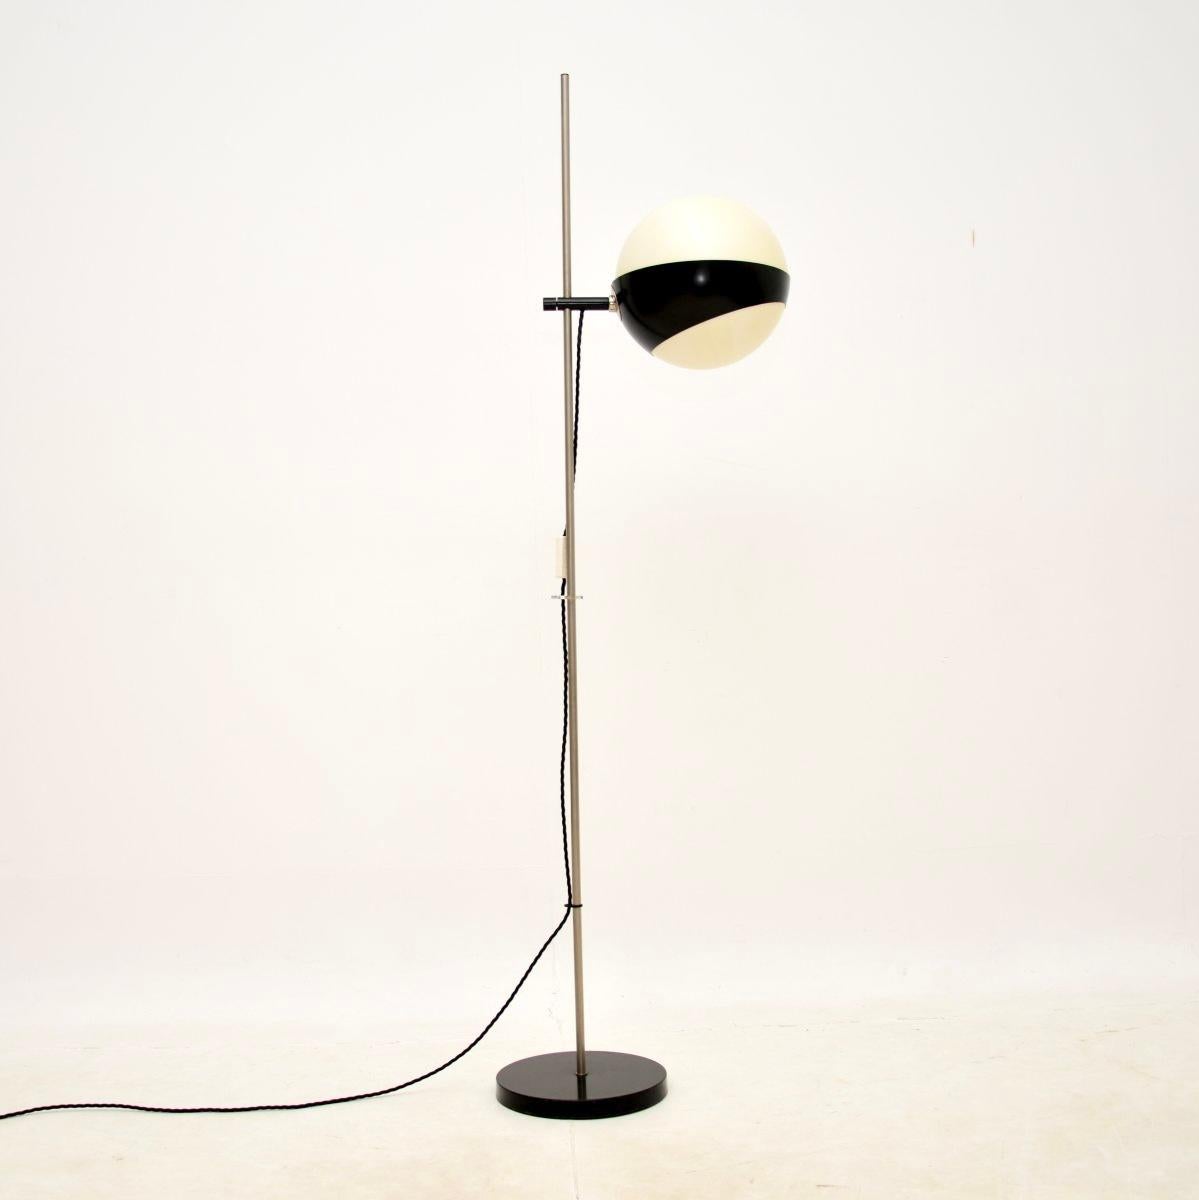 A stylish and extremely well made vintage floor lamp by Hala Zeist. This was made in the Netherlands, it dates from the 1960’s.

The quality is superb, this has a fantastic design with a white spherical acrylic shade that sits cradled in a black